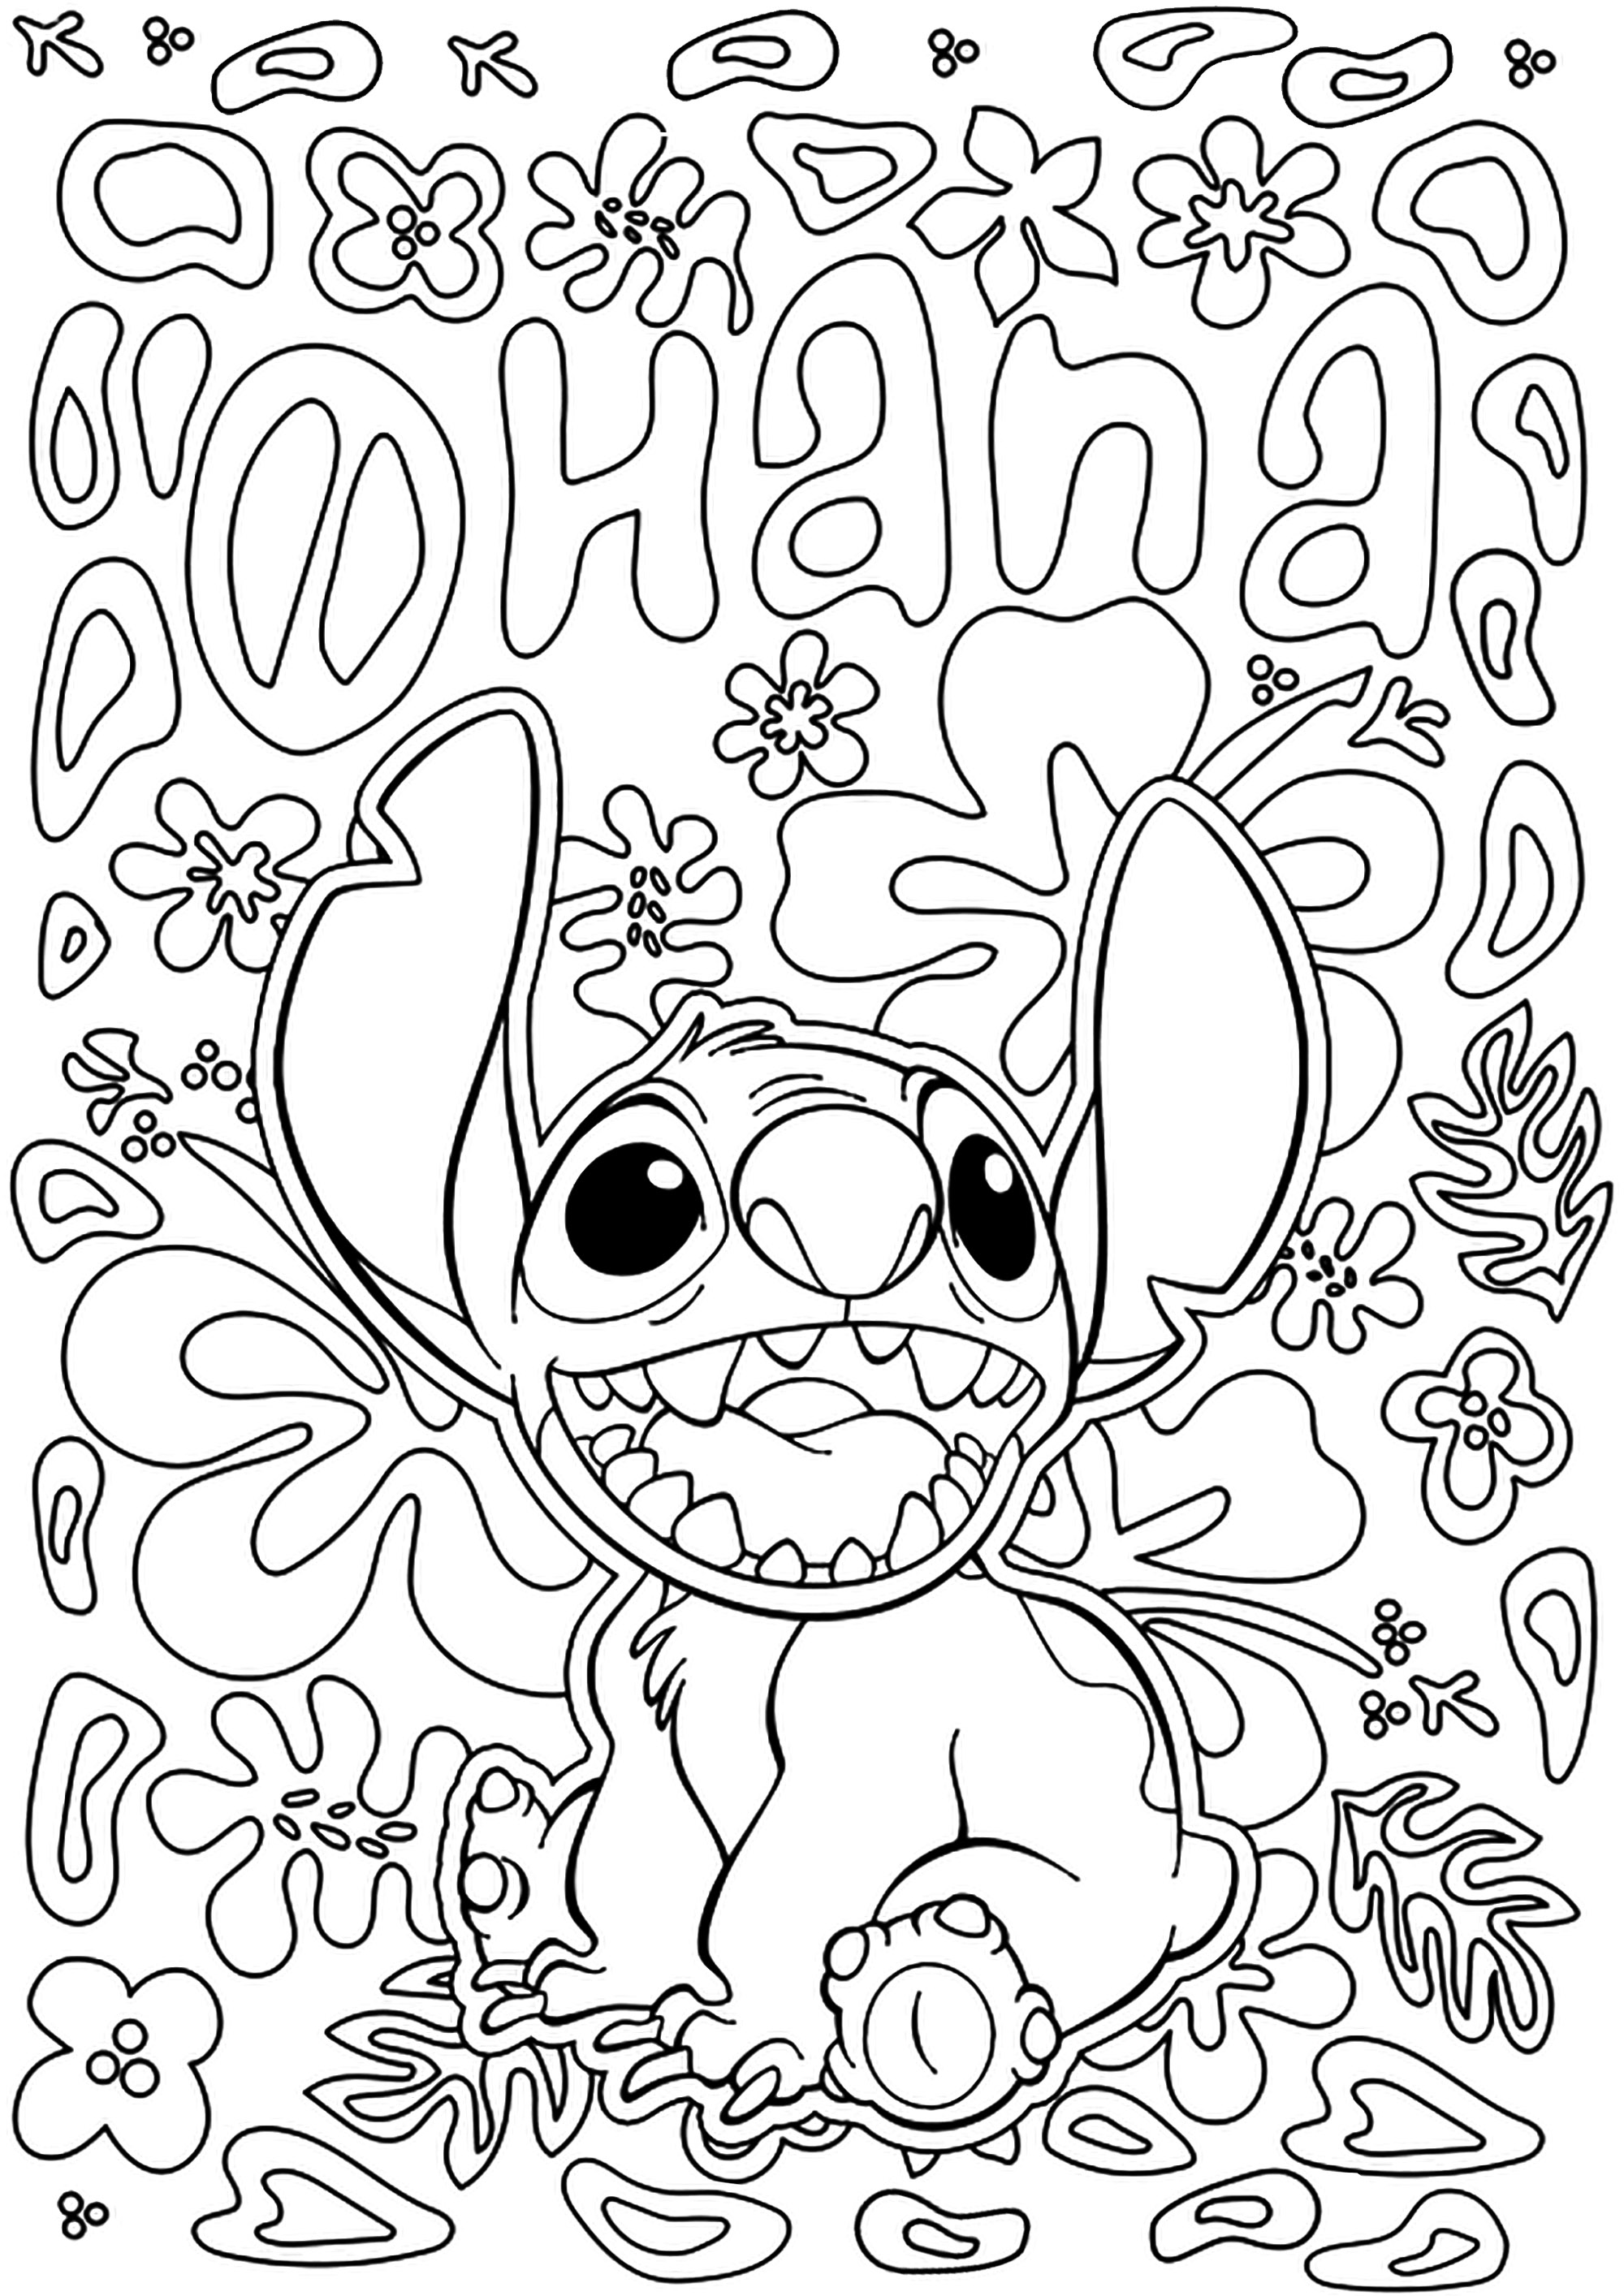 Stitch coloring page with the text 'Ohana' (from Disney animated movie Lilo and Stitch). Ohana is a Hawaiian term that translates as 'family', whether by adoption, blood or intention.